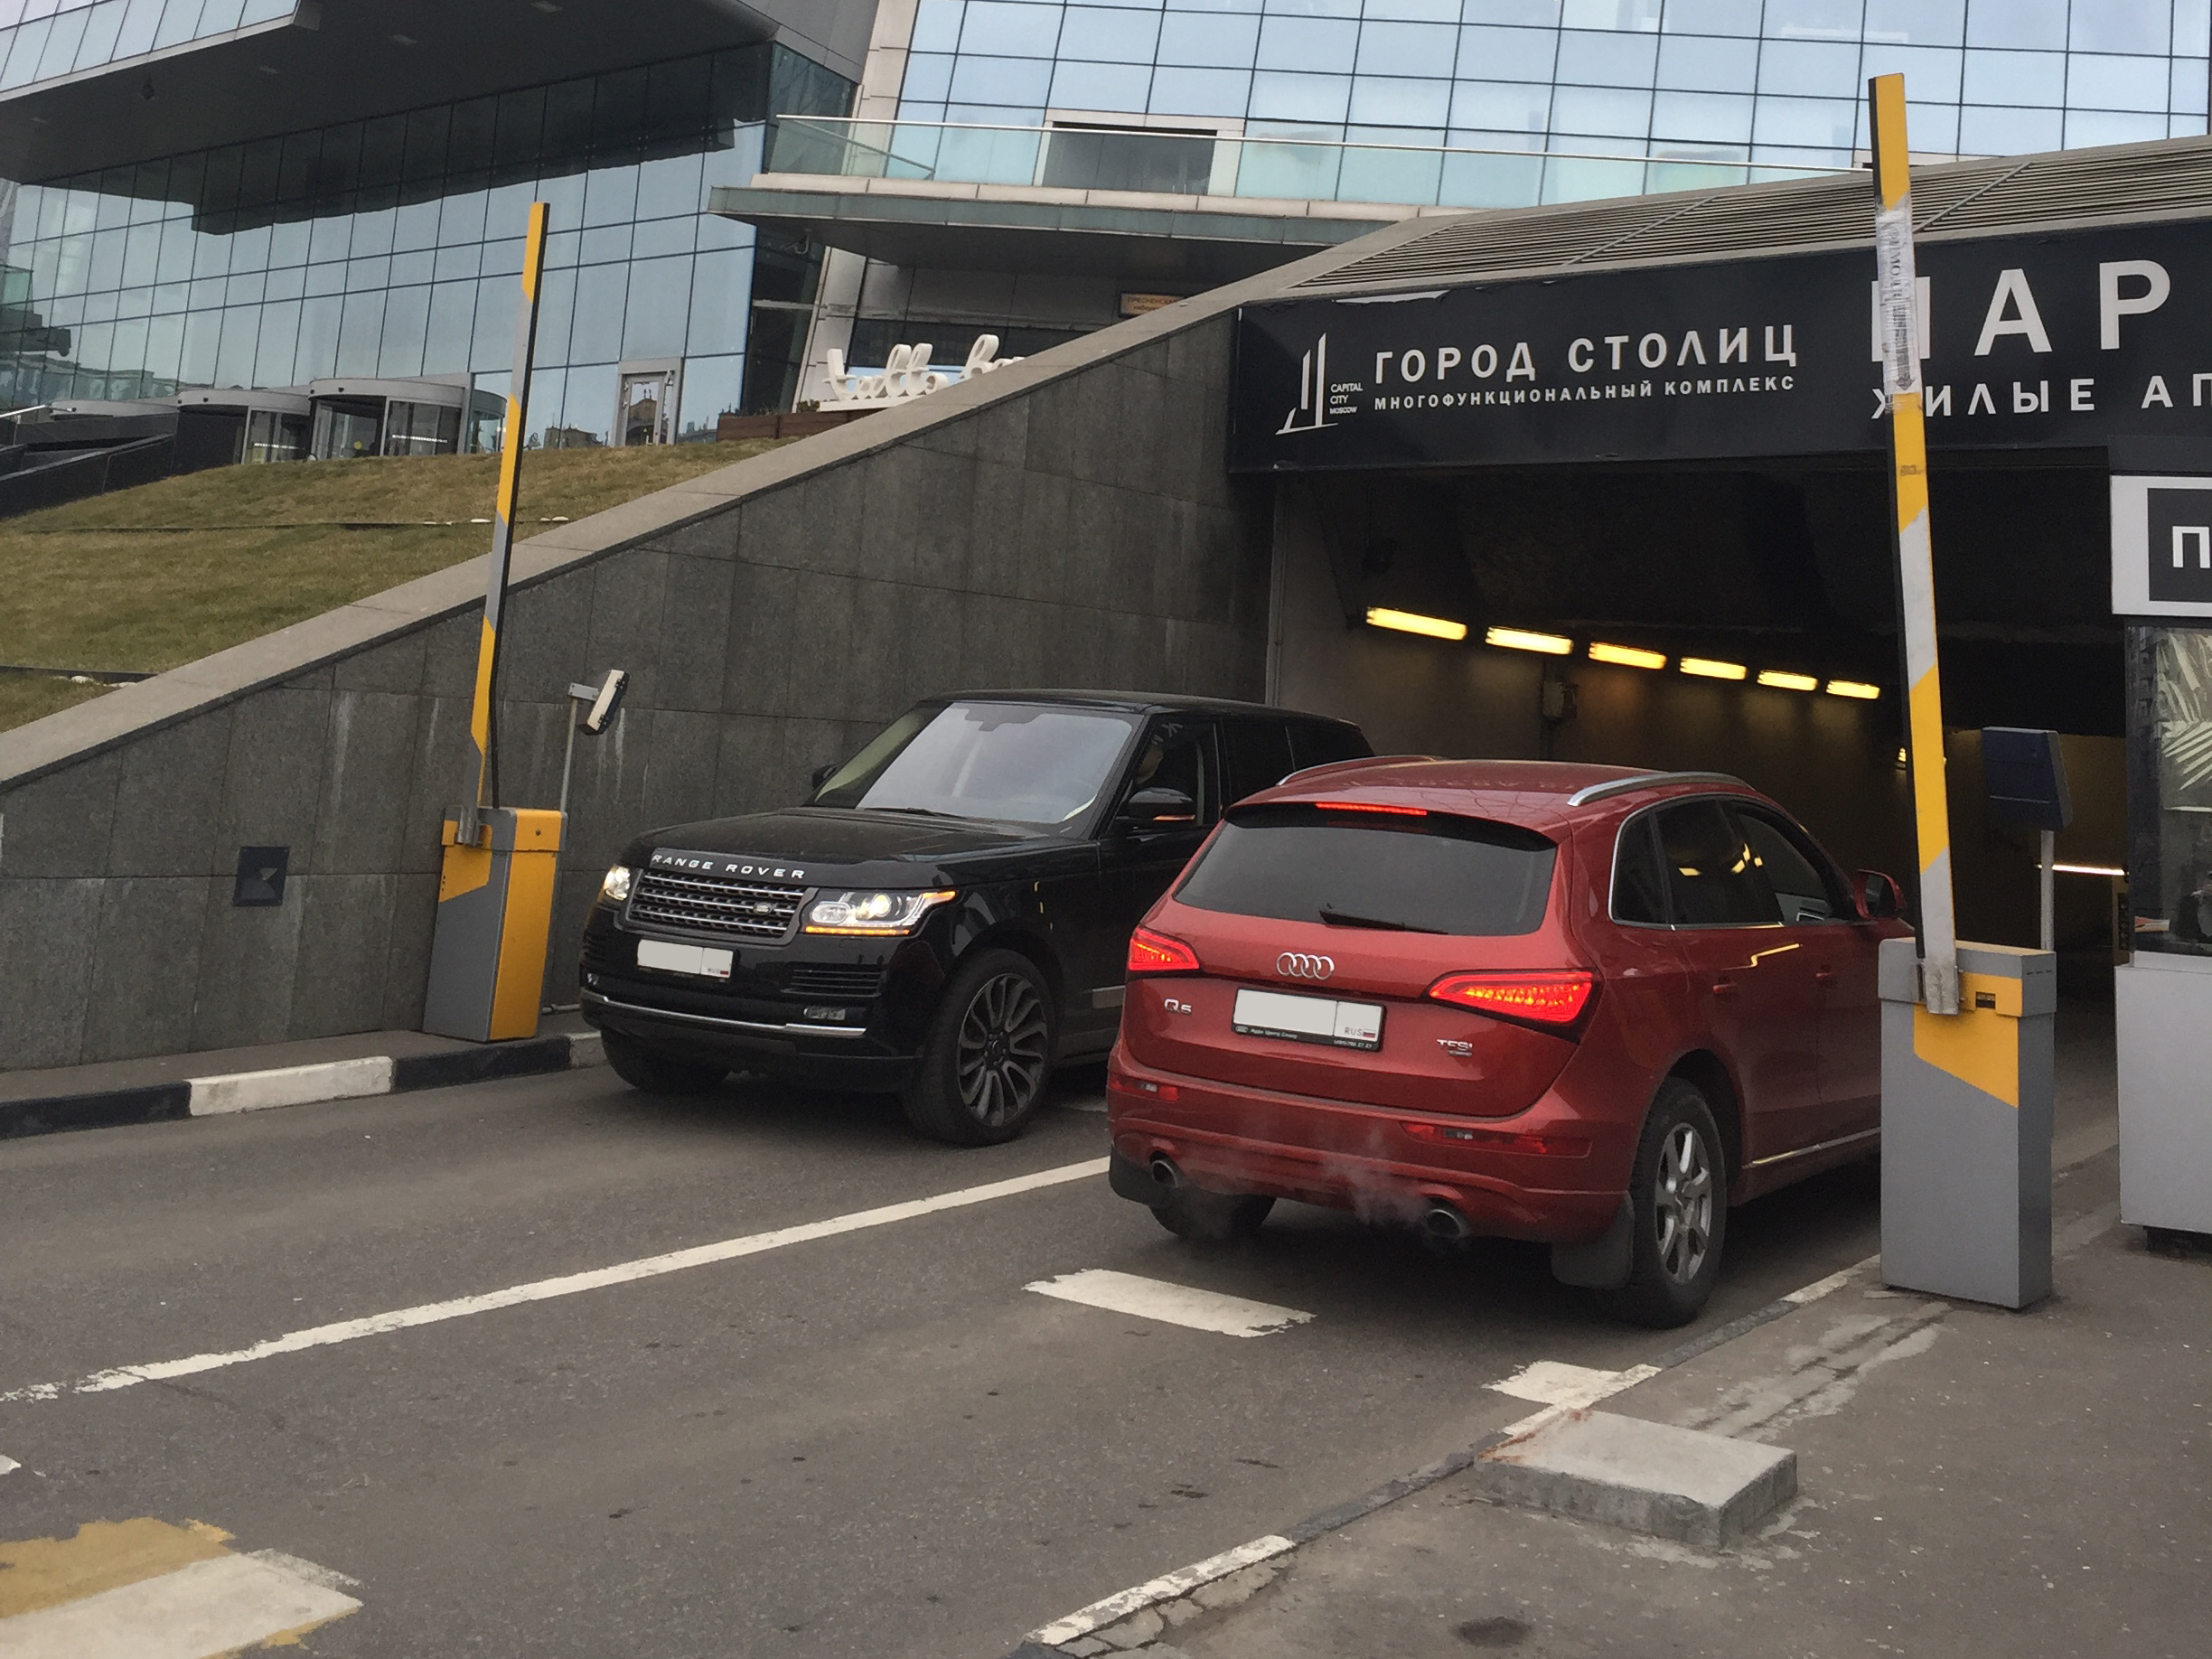 Advanced vehicle access in Moscow